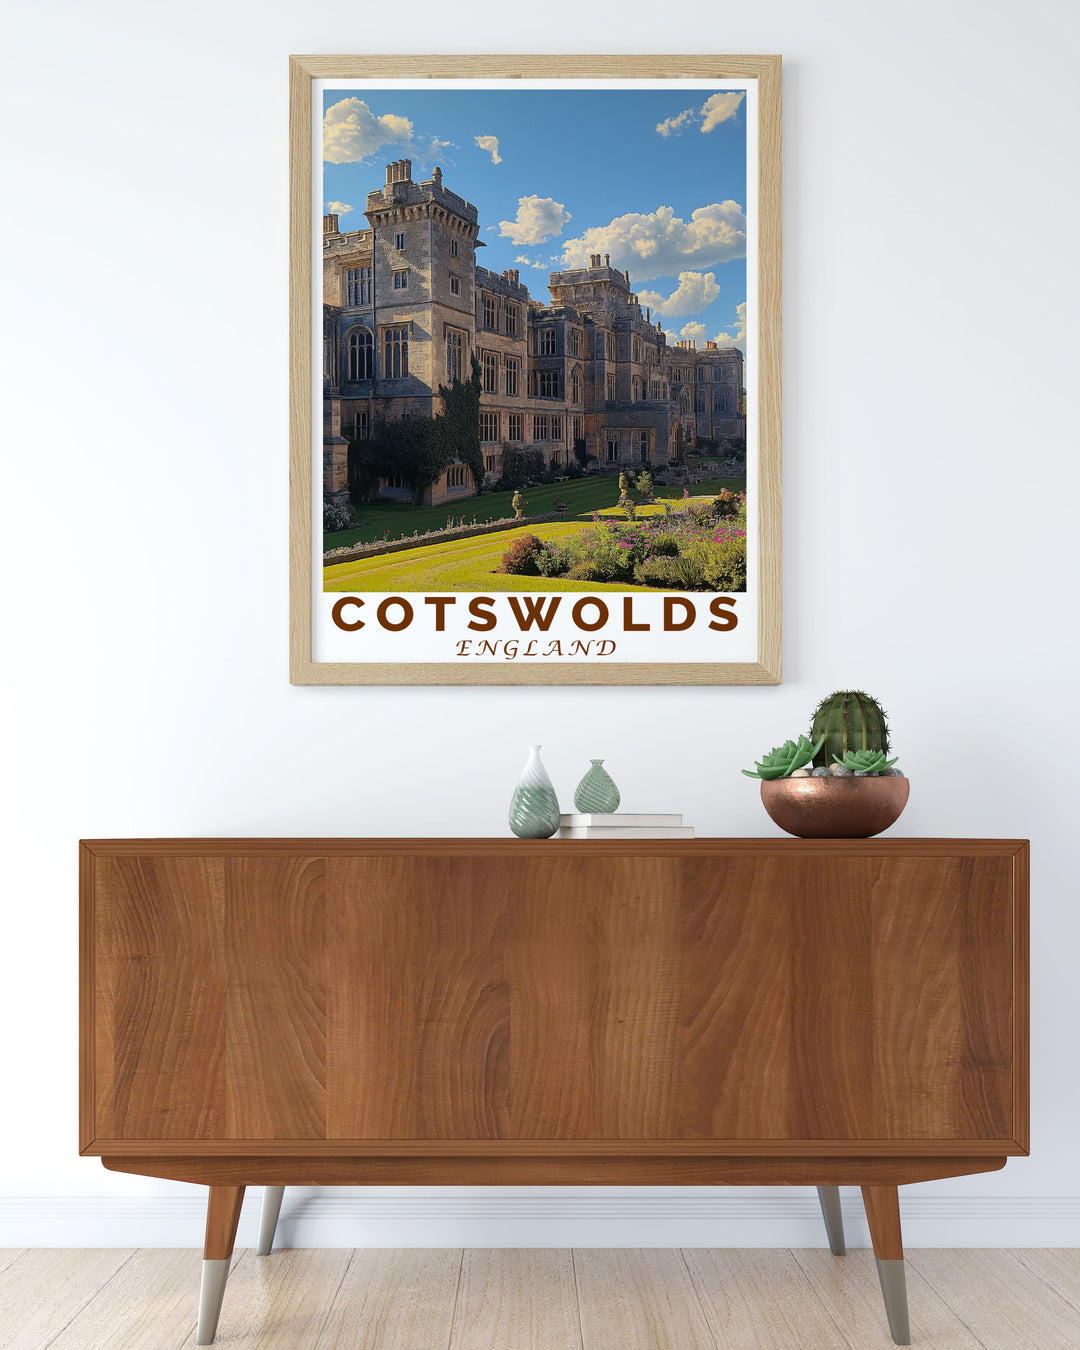 Featuring lush vistas of the Cotswolds and the iconic Sudeley Castle, this poster is perfect for those who wish to bring a piece of Englands royal history and natural beauty into their home.